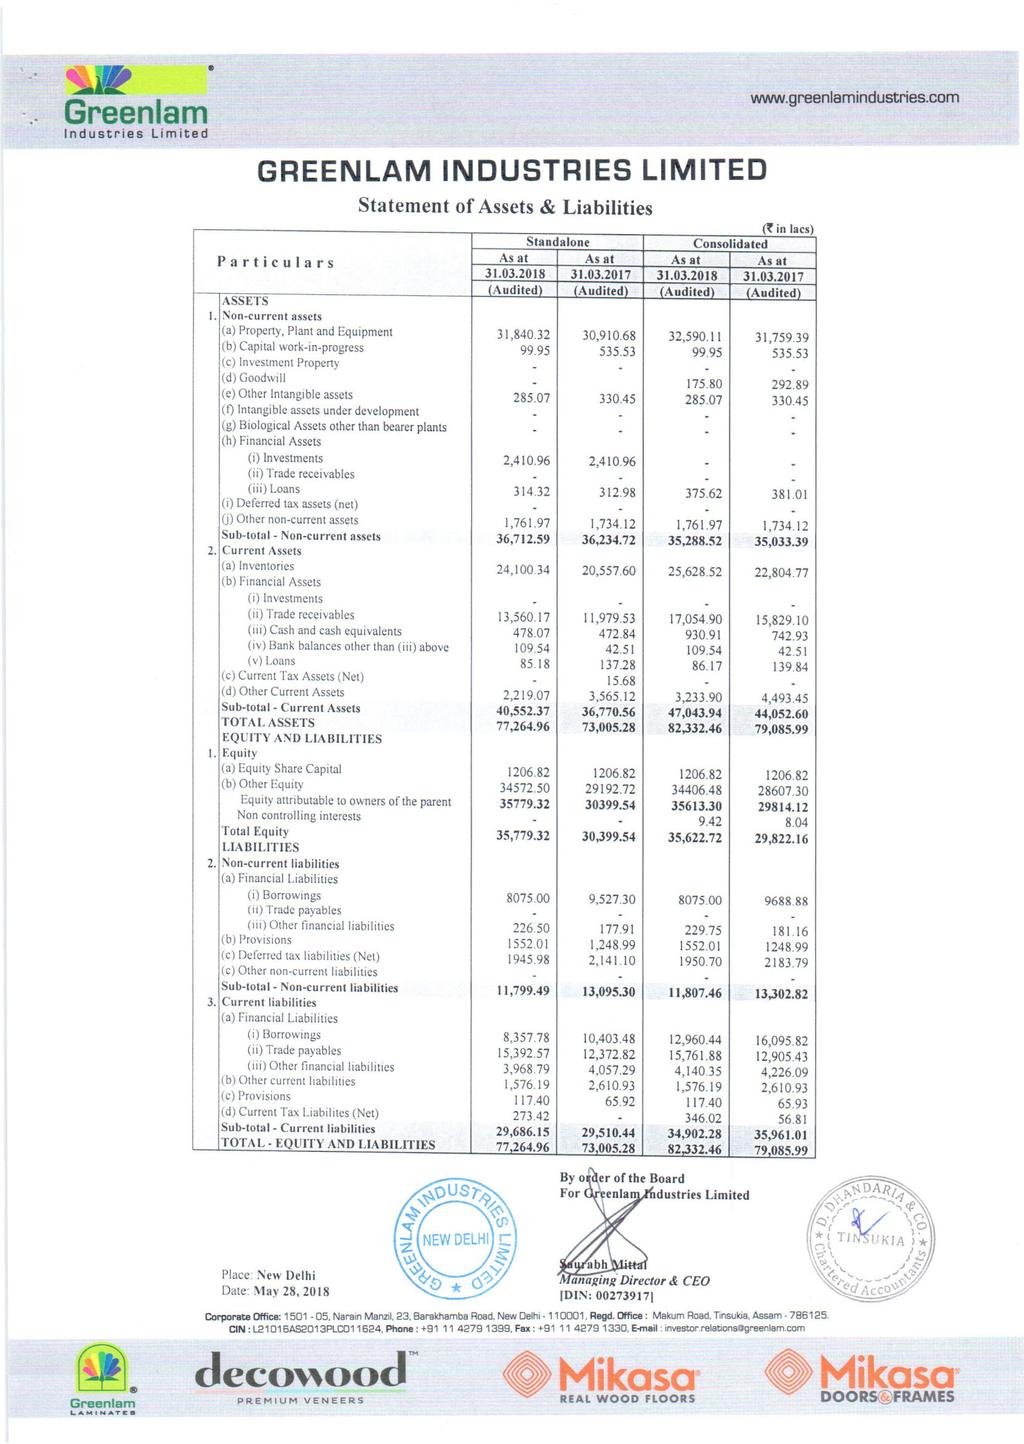 www.greenlamindustries.com ndustries Limited GREENLAM NDUSTRES LMTED Statement of Assets & Liabilities Standalone ~ in lacs) Consolidated As at As at As at As at 31.03.